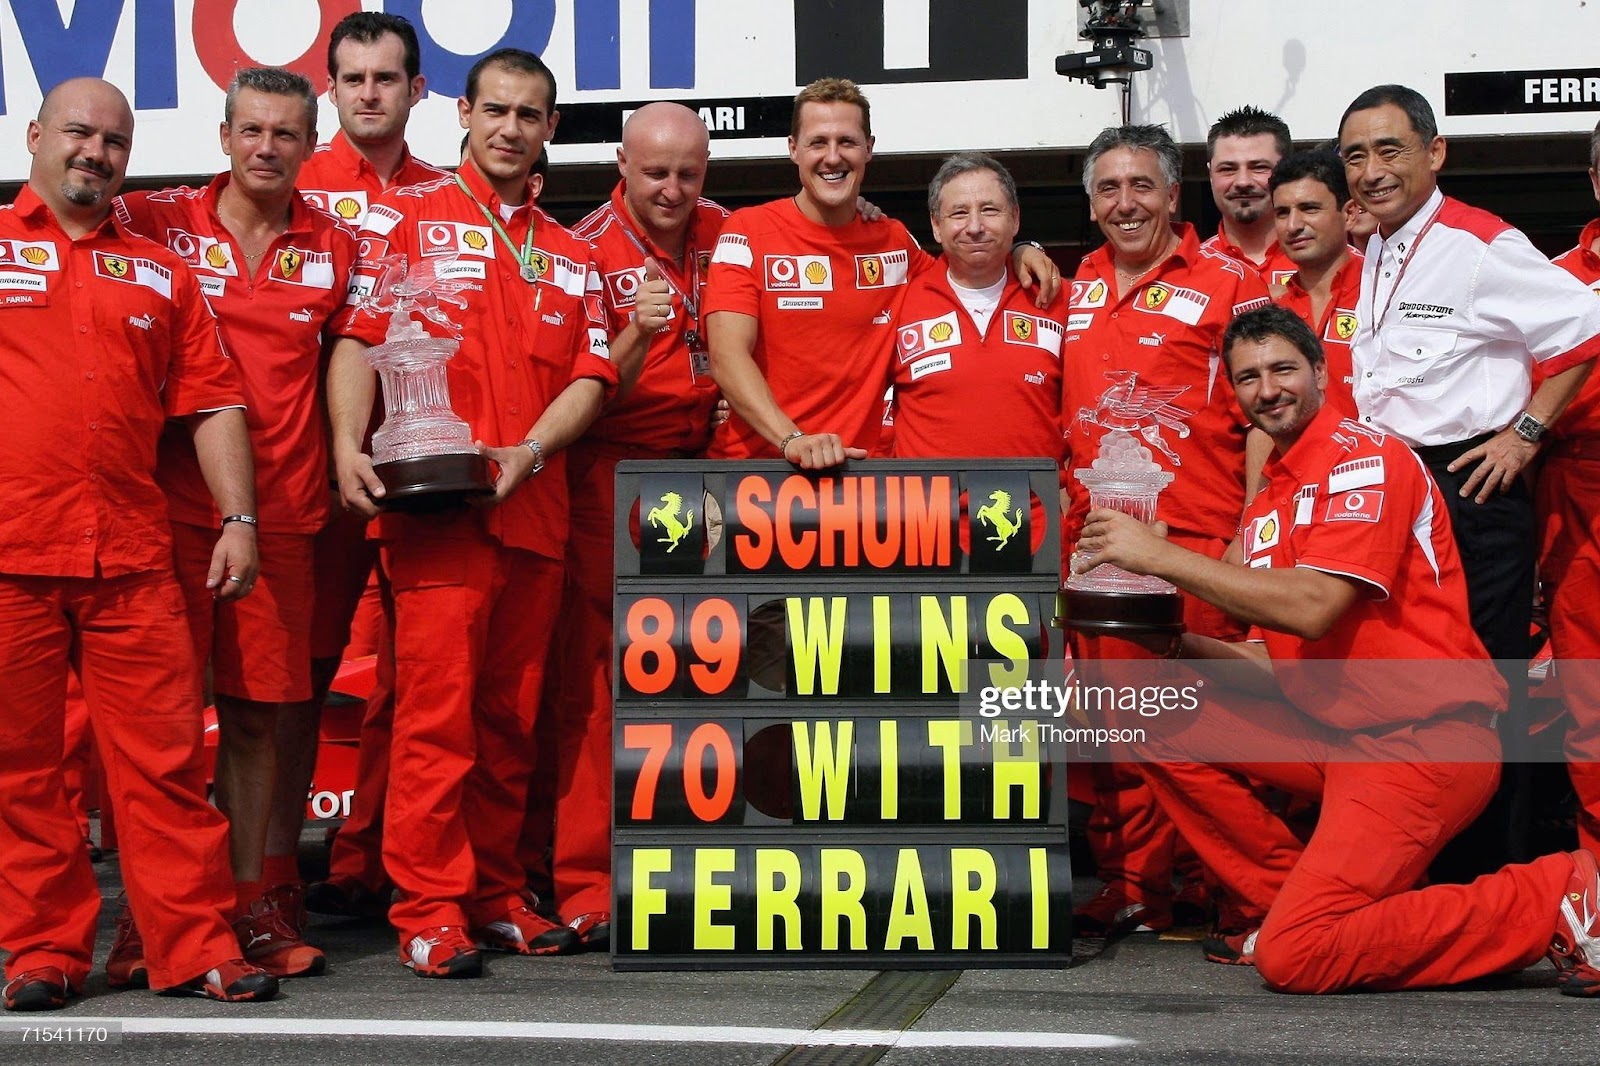 Michael Schumacher, Ferrari, celebrates his victory with his team-mates after the German F1 Grand Prix at the Hockenheimring on July 30, 2006 in Hockenheim, Germany.